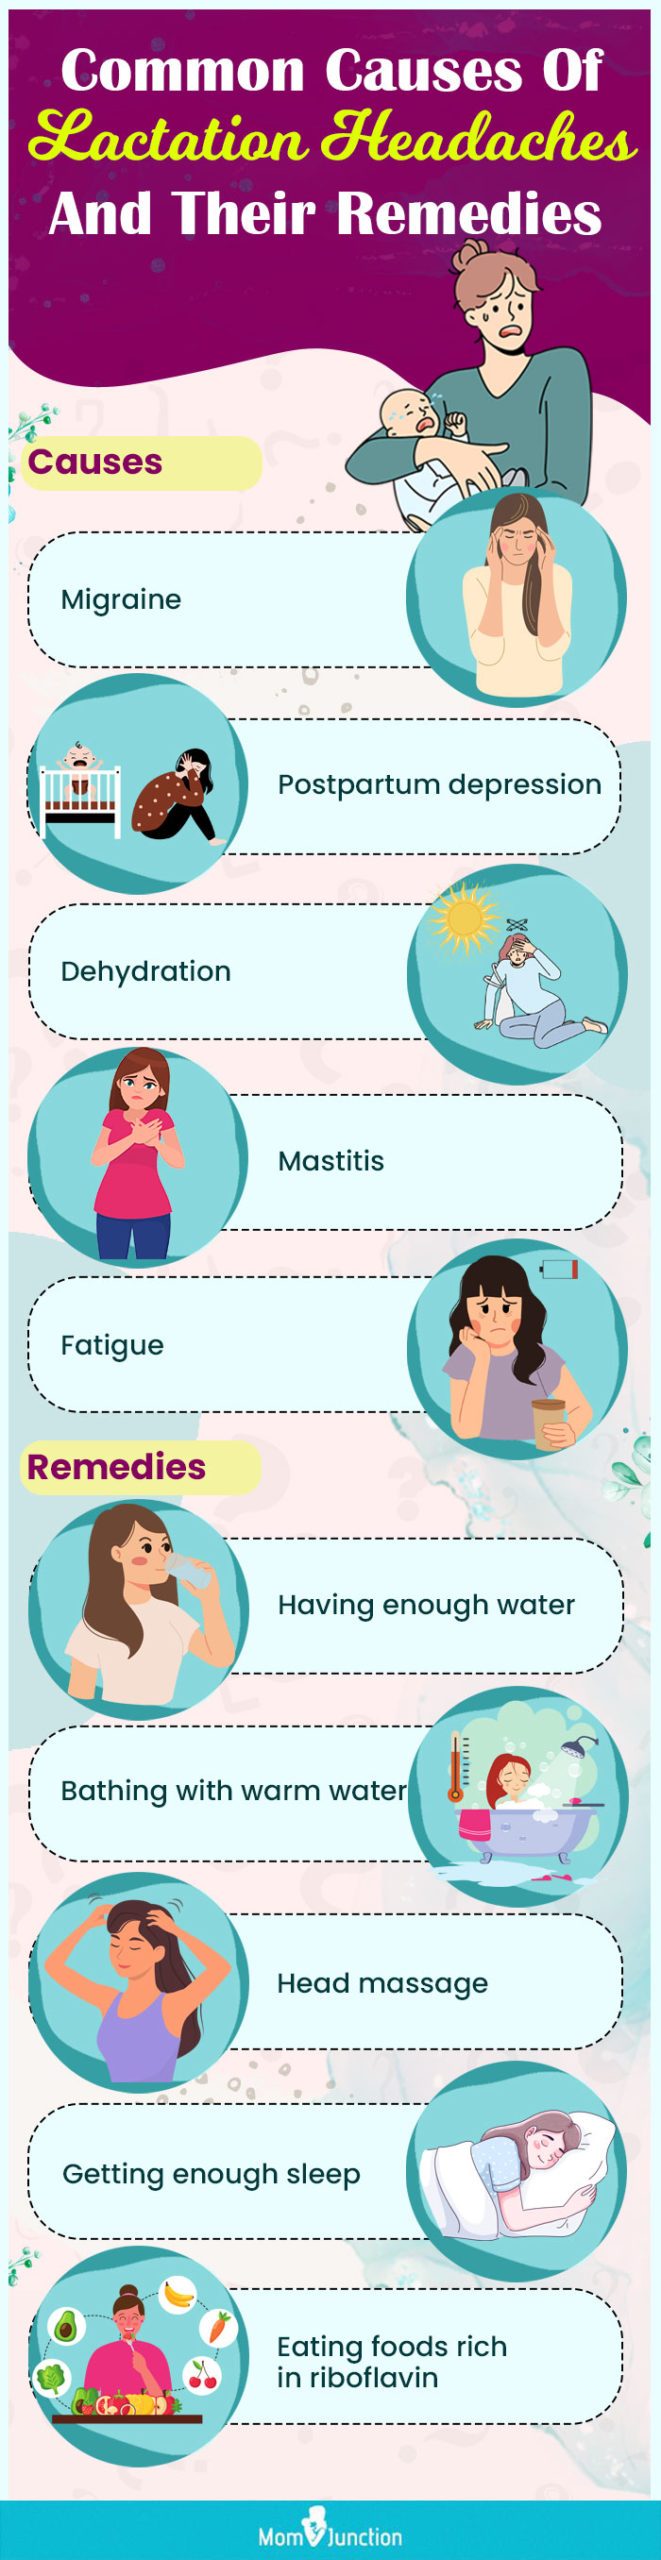 https://www.momjunction.com/wp-content/uploads/2023/01/Common-Causes-Of-Lactation-Headaches-And-Their-Remedies-scaled.jpg